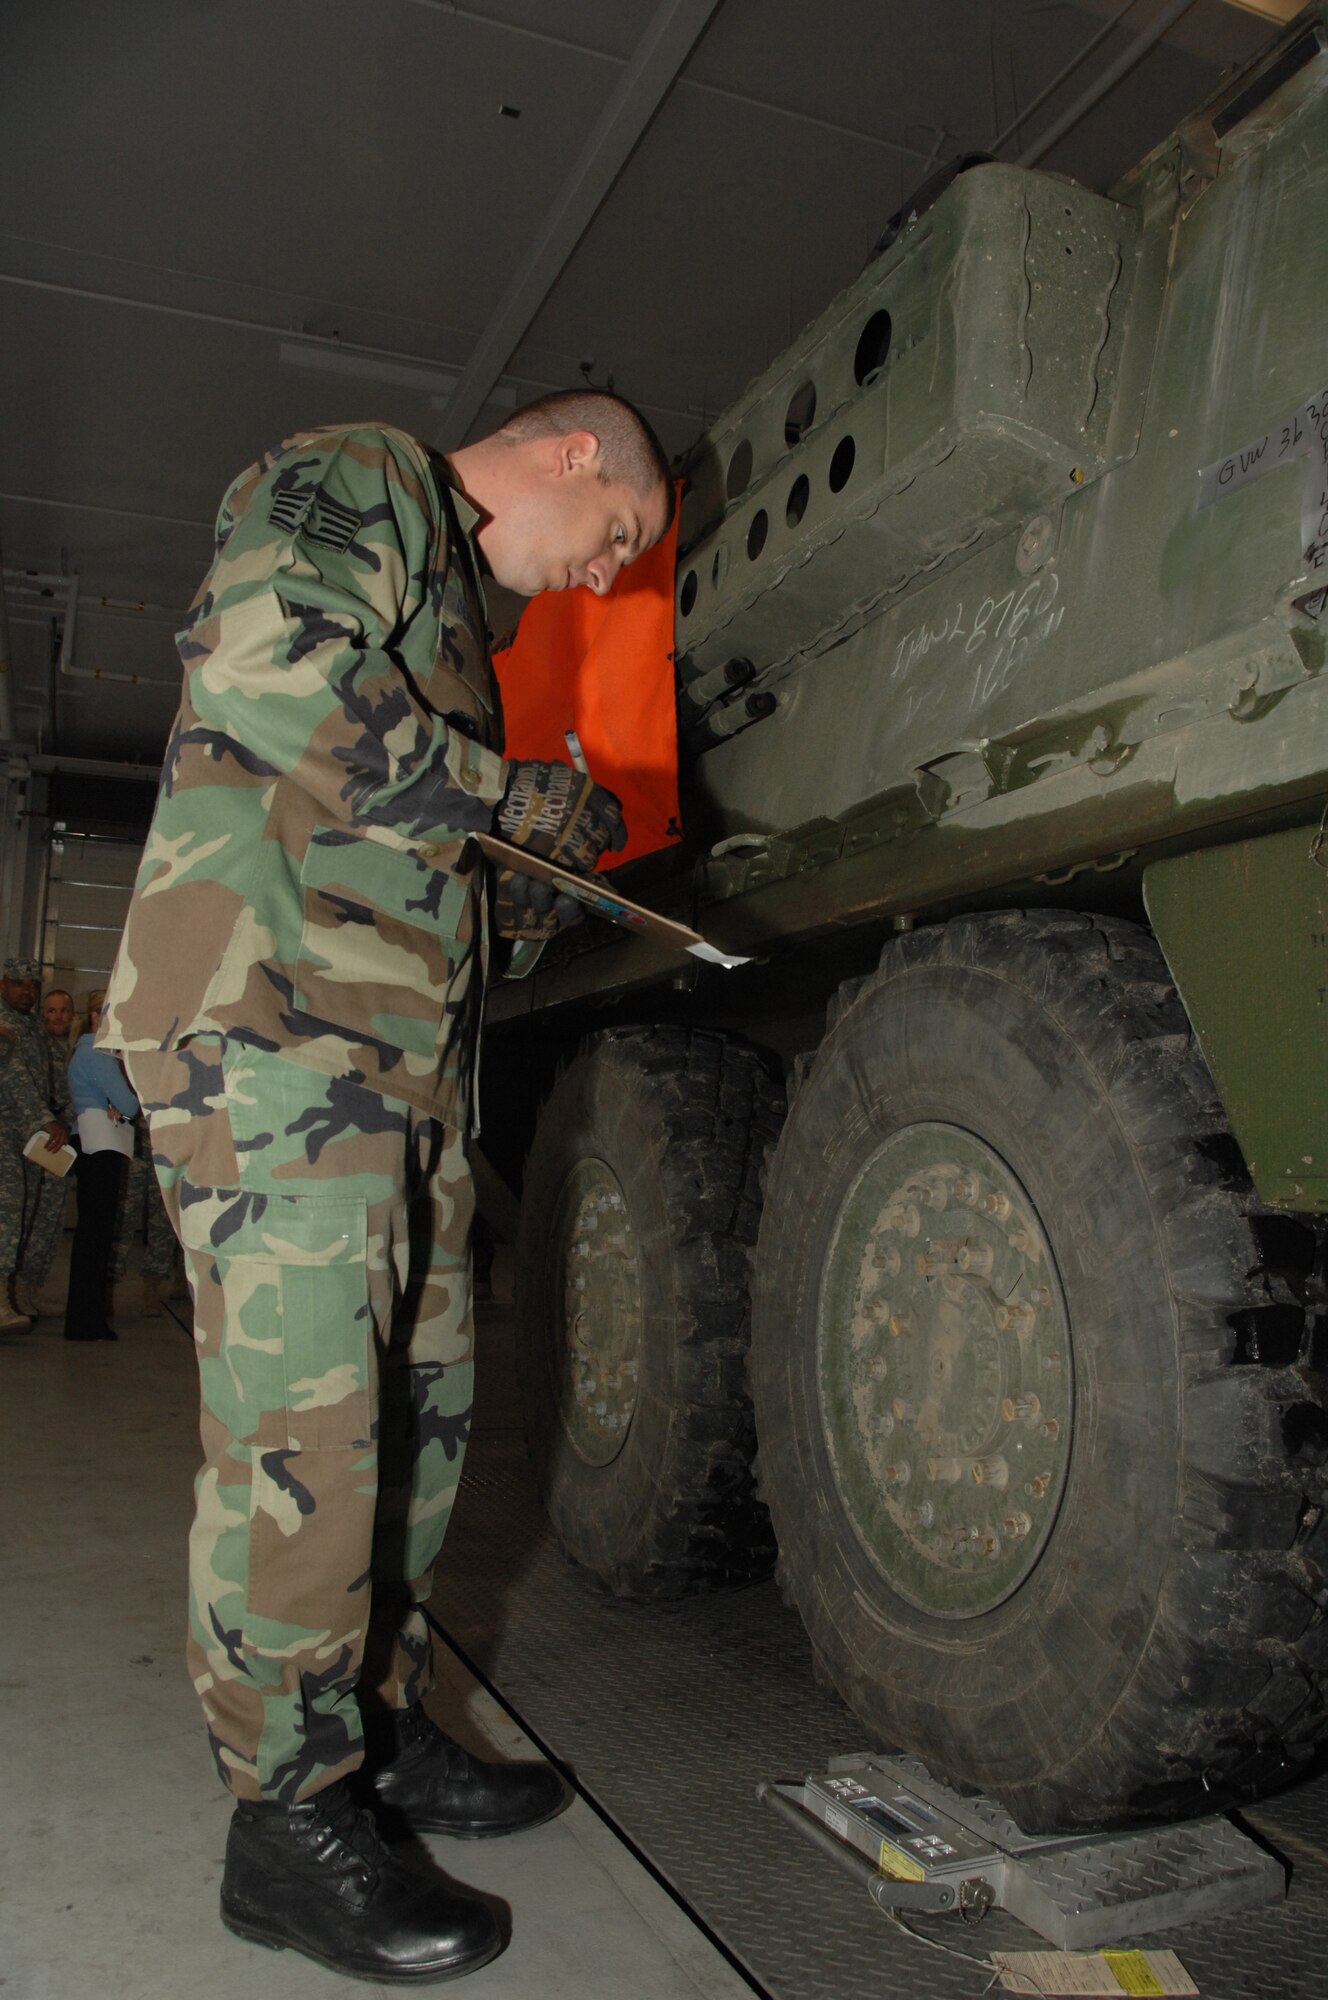 EIELSON AIR FORCE BASE, Alaska -- Staff Sgt. Brad DeVinney, 354th Logistic Readiness Squadron, calculates the total weight of a Stryker Combat Vehicle Sept. 19, 2007 at the ammunition processing facility adjacent to the Eielson Joint Mobility Complex. Eielson's 354th Logistic Readiness Squadron personnel conducted a joint training event to orientate Stryker personnel on aerial movement preparation of the Stryker Combat Vehicle. This was the first time Icemen and Arctic Wolves teamed up to conduct joint mobility training featuring Eielson as an aerial port of embarkation.   (U.S. Air Force photo by Airman 1st Class Christopher Griffin)